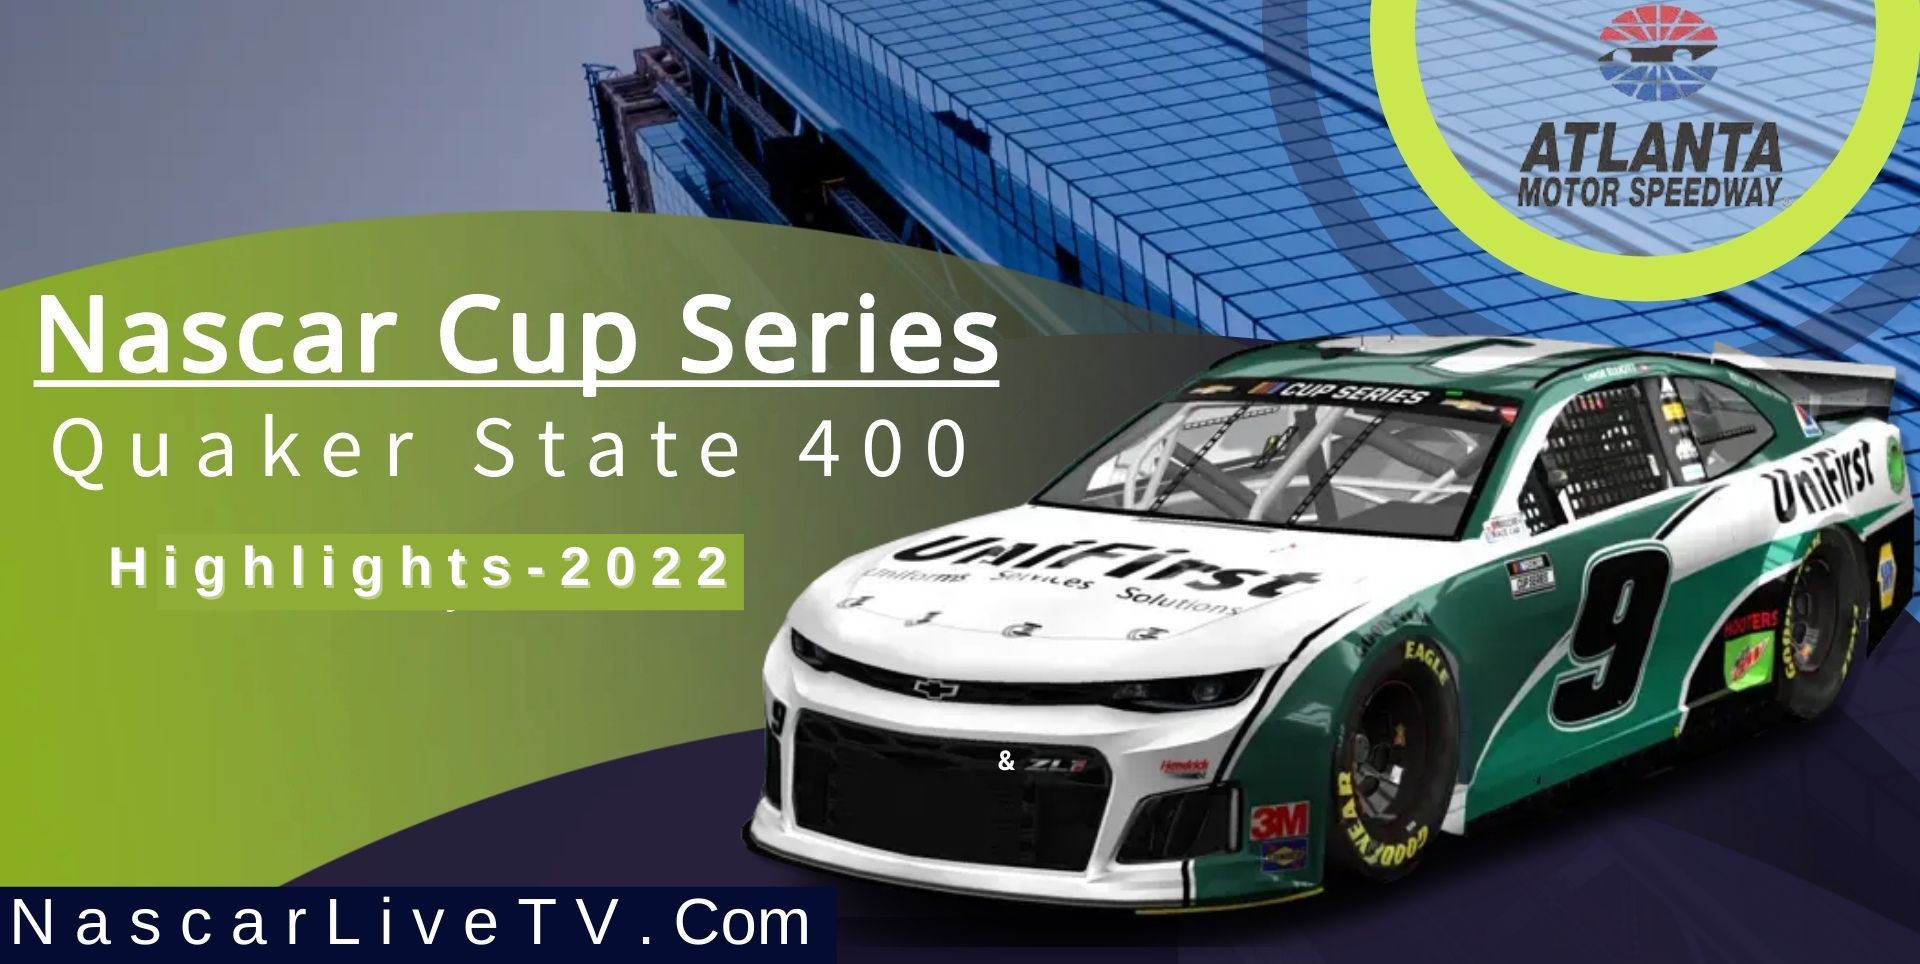 Quaker State 400 Highlights NASCAR Cup Series 2022